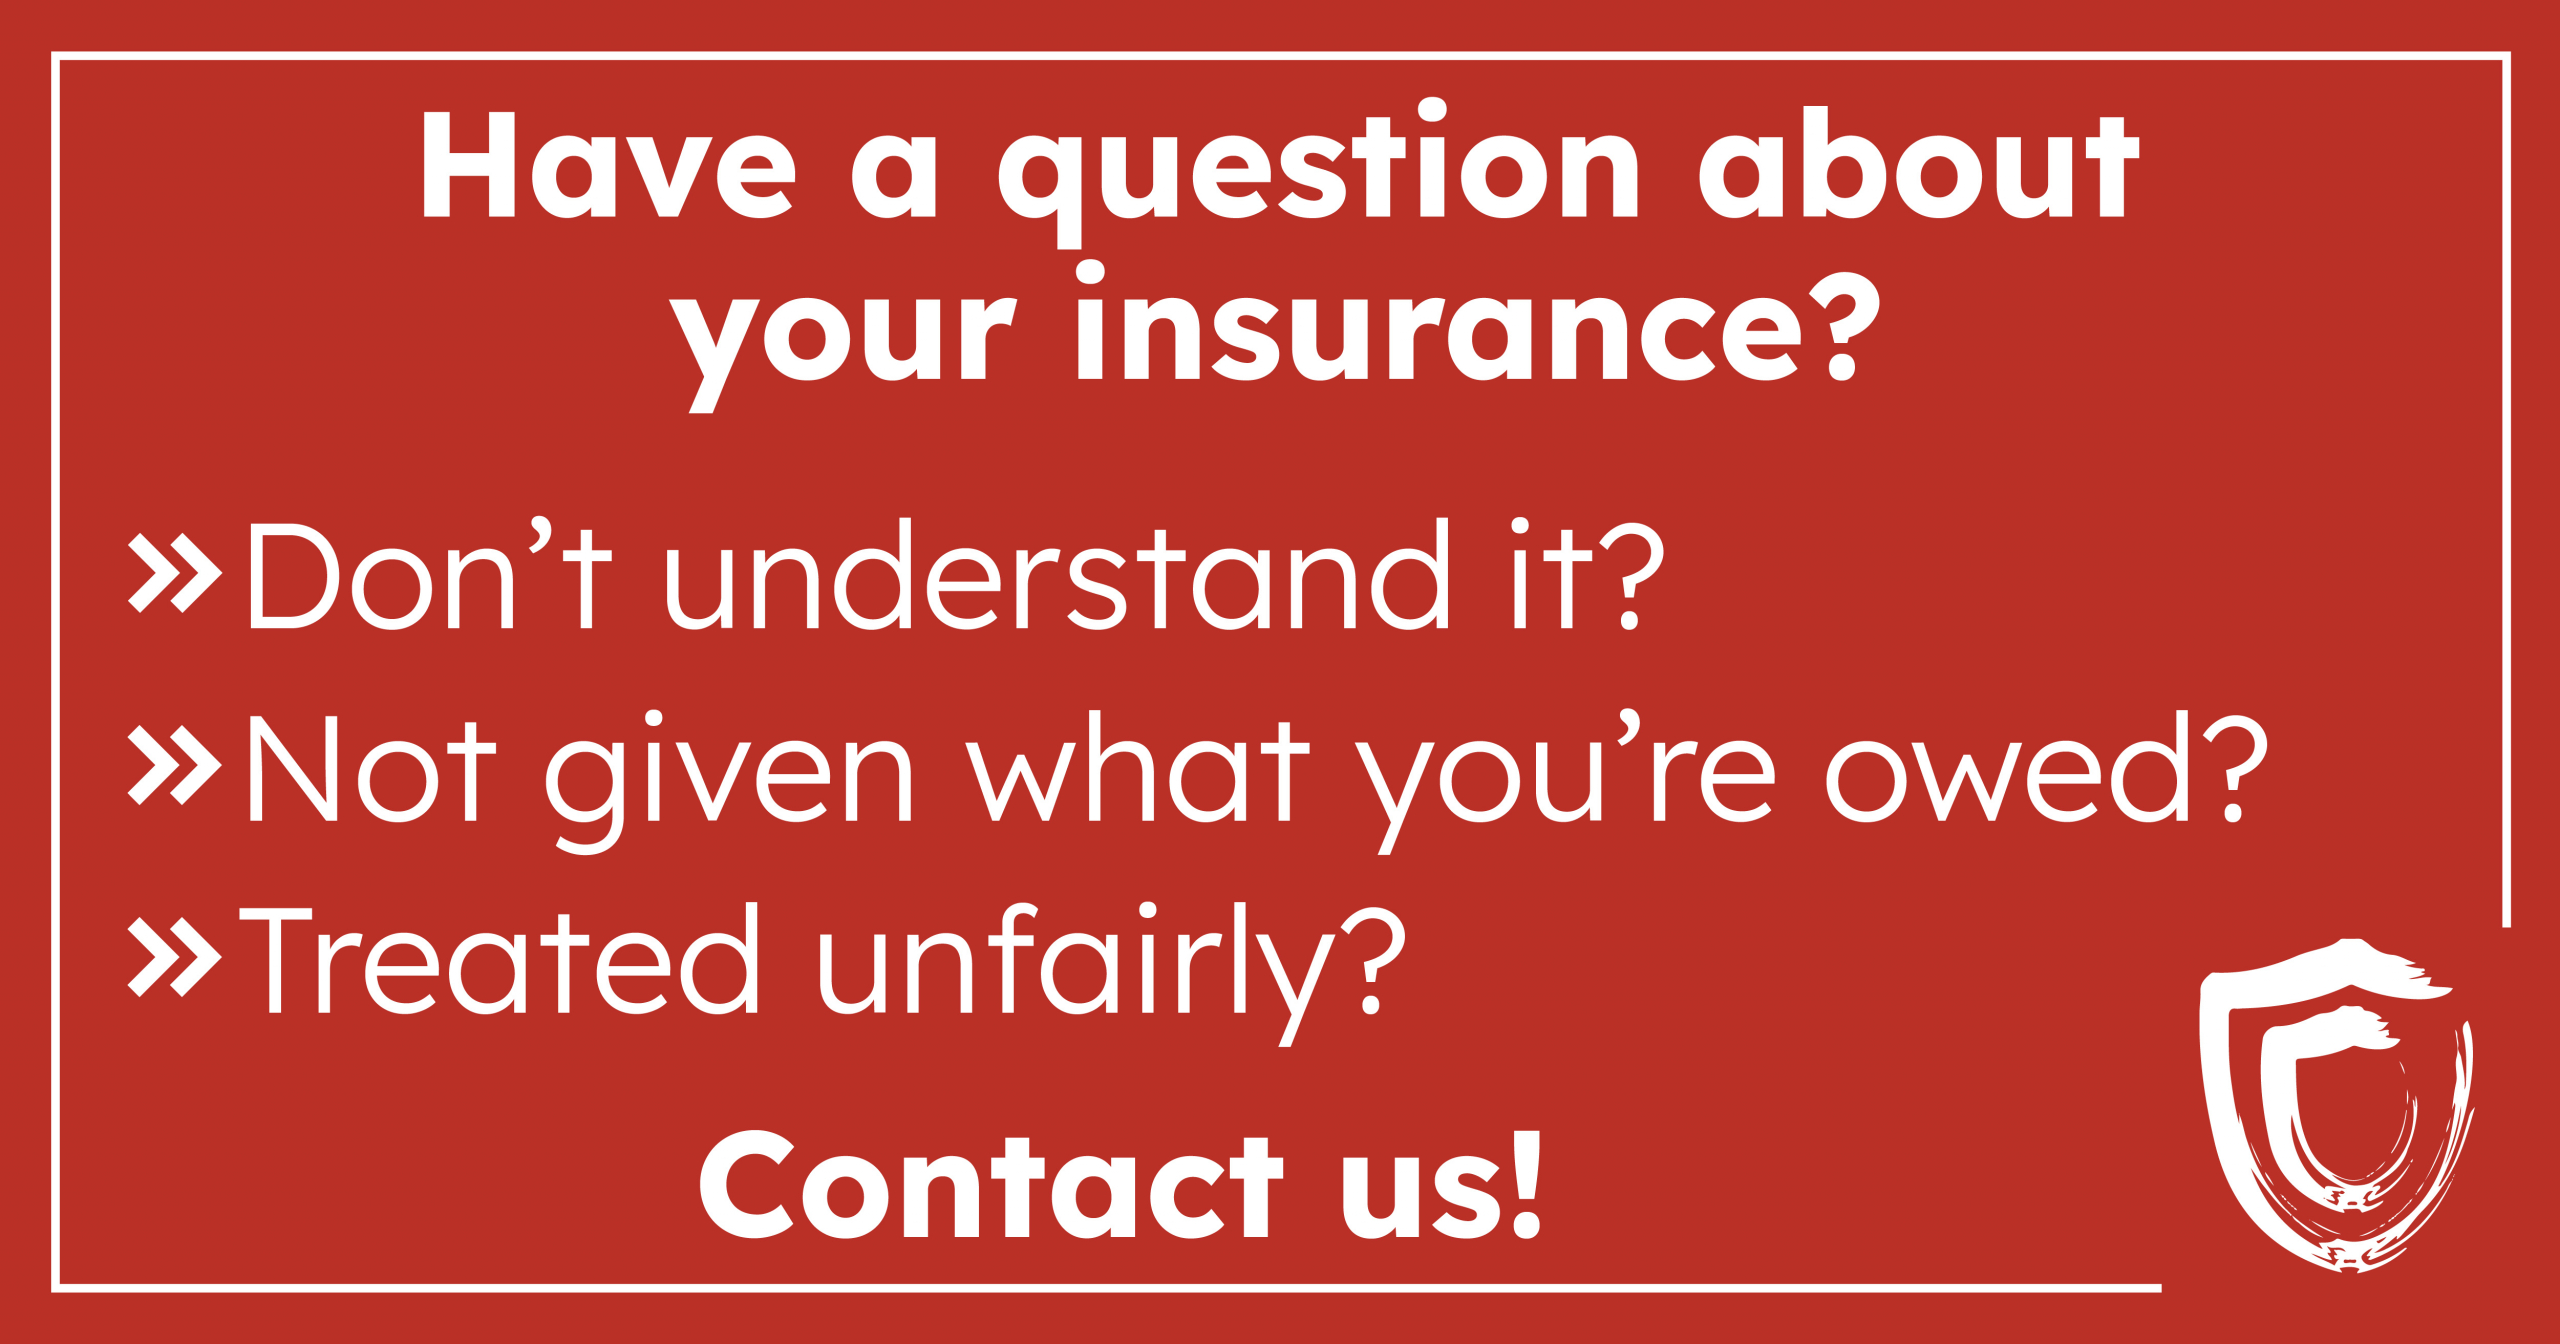 Have a question about your insurance? Contact us!